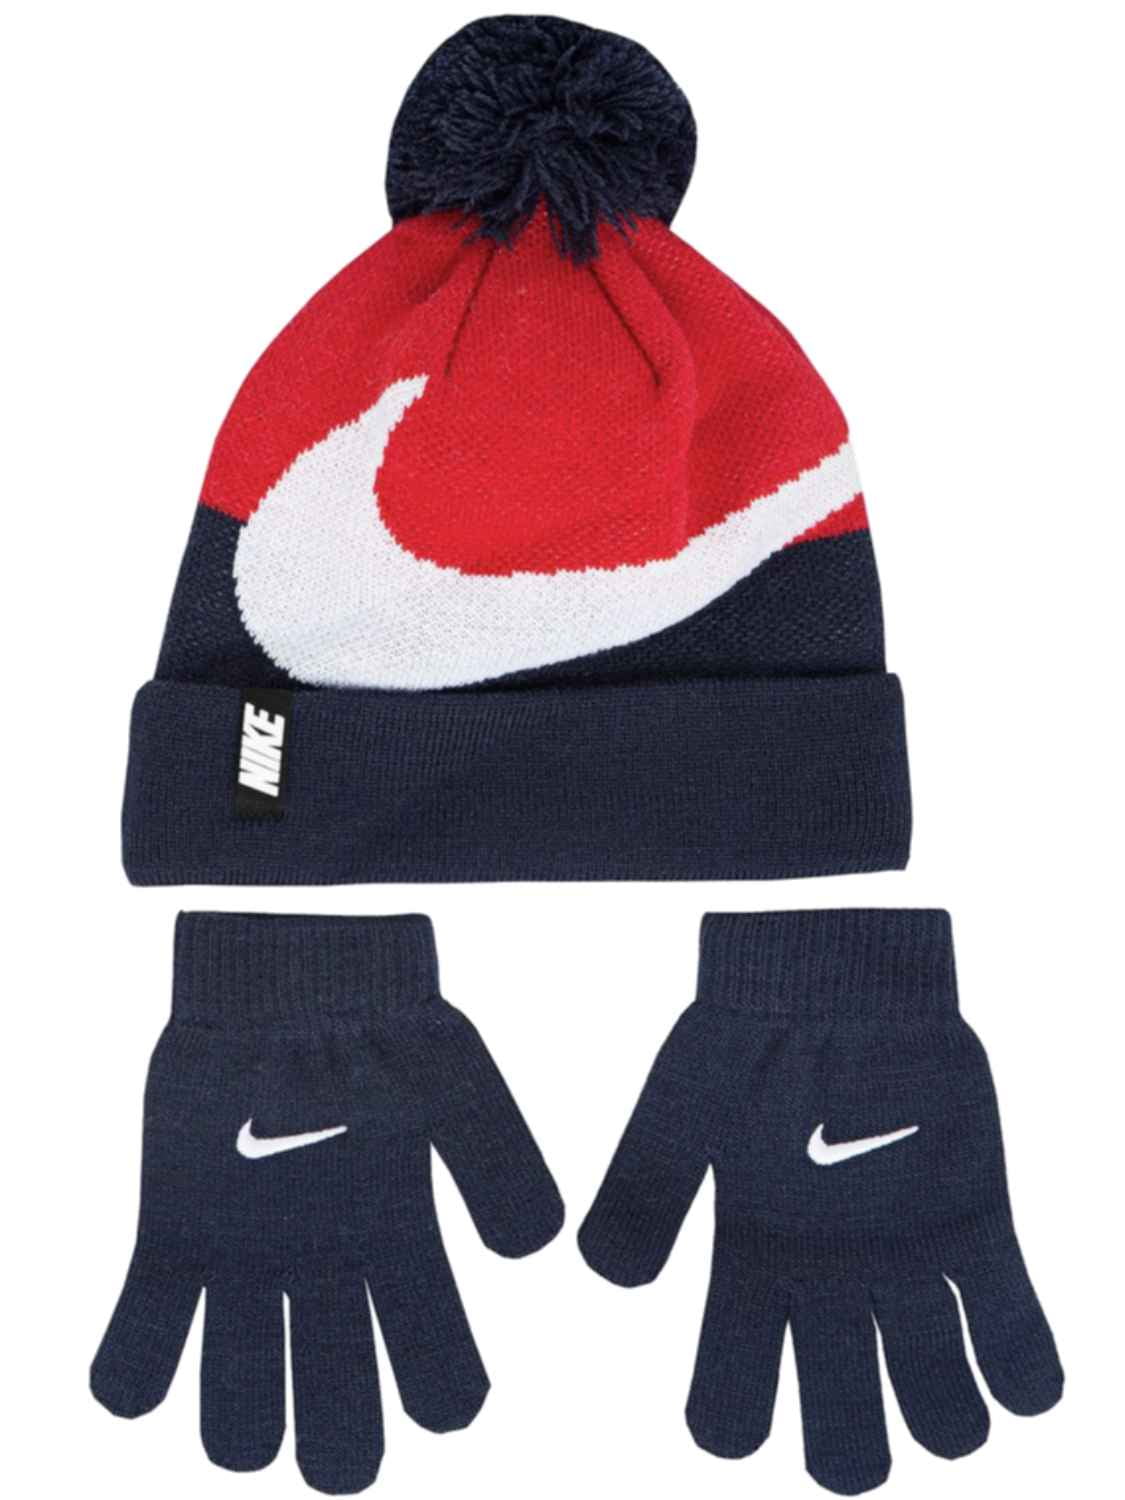 nike winter hats and gloves